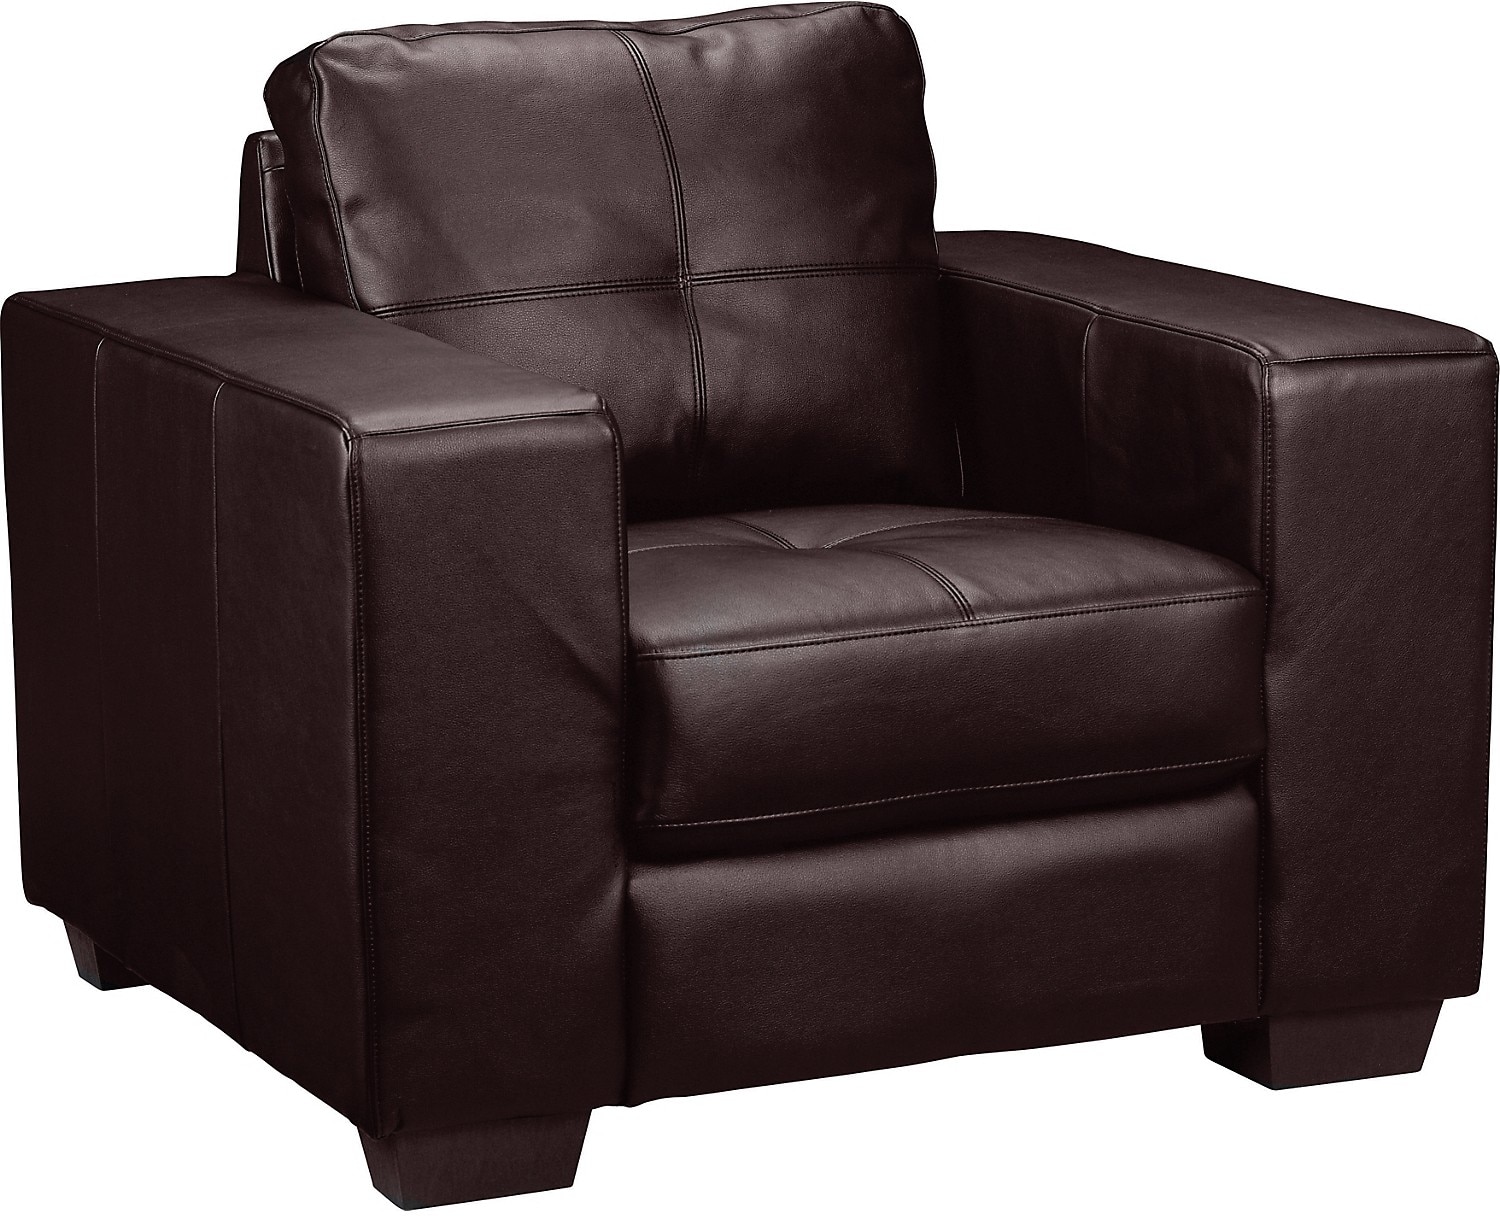 costa bonded leather sofa review